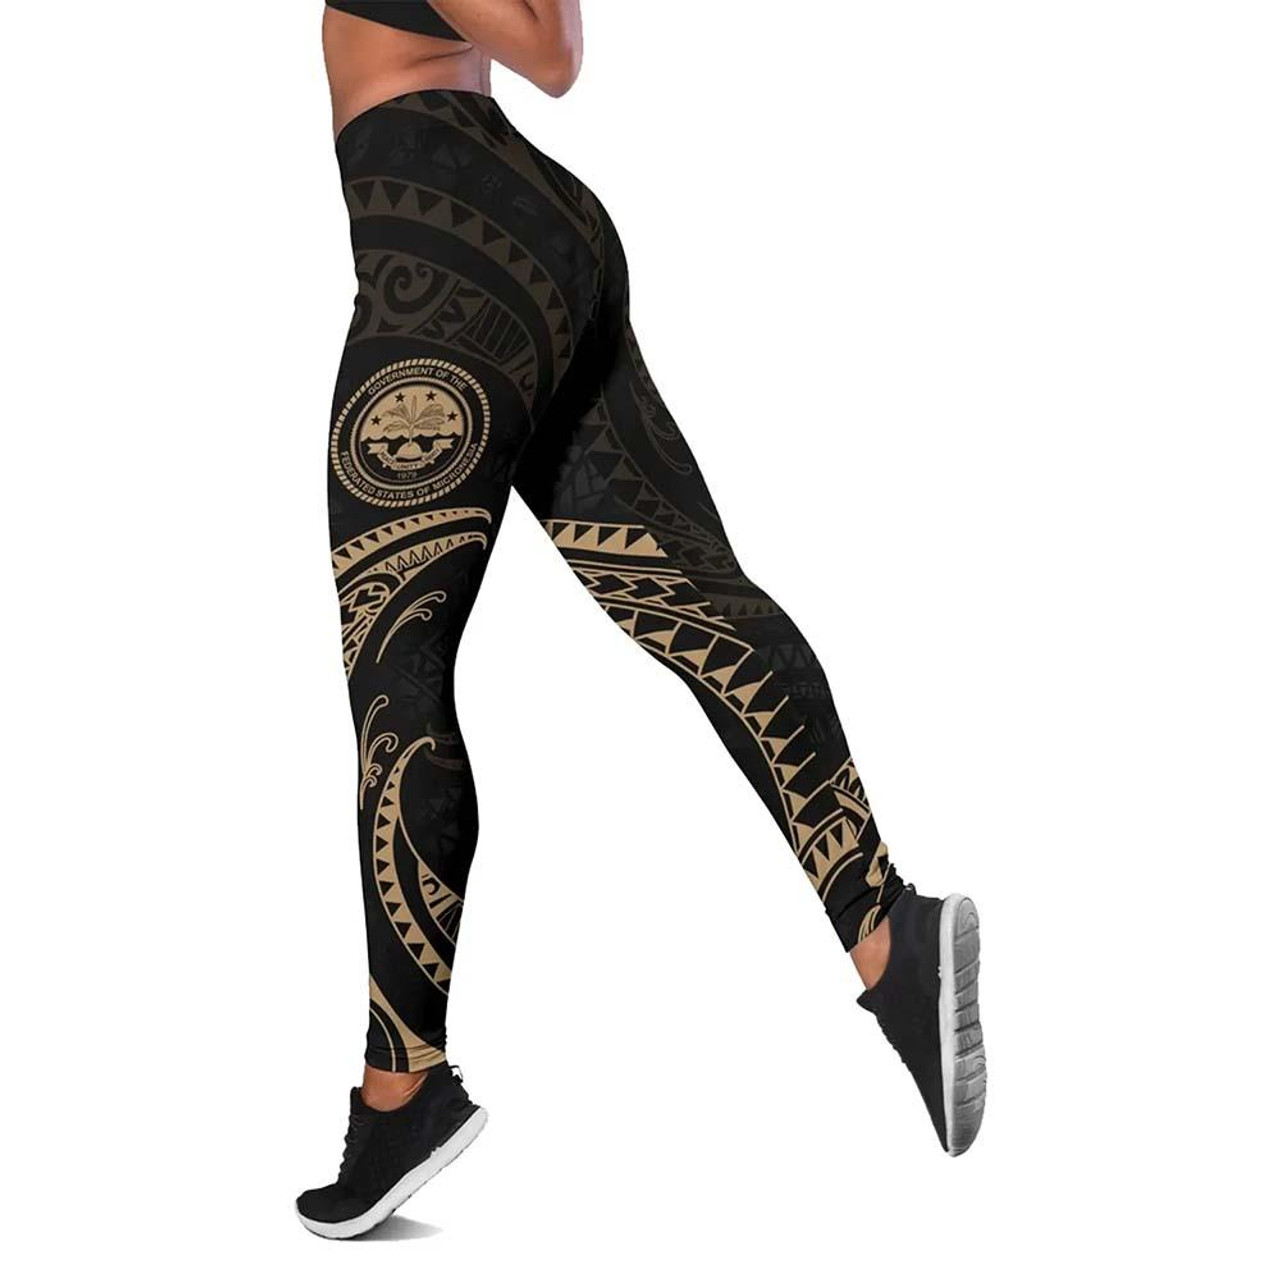 Federated States of Micronesia Legging - Gold Tribal Wave 1